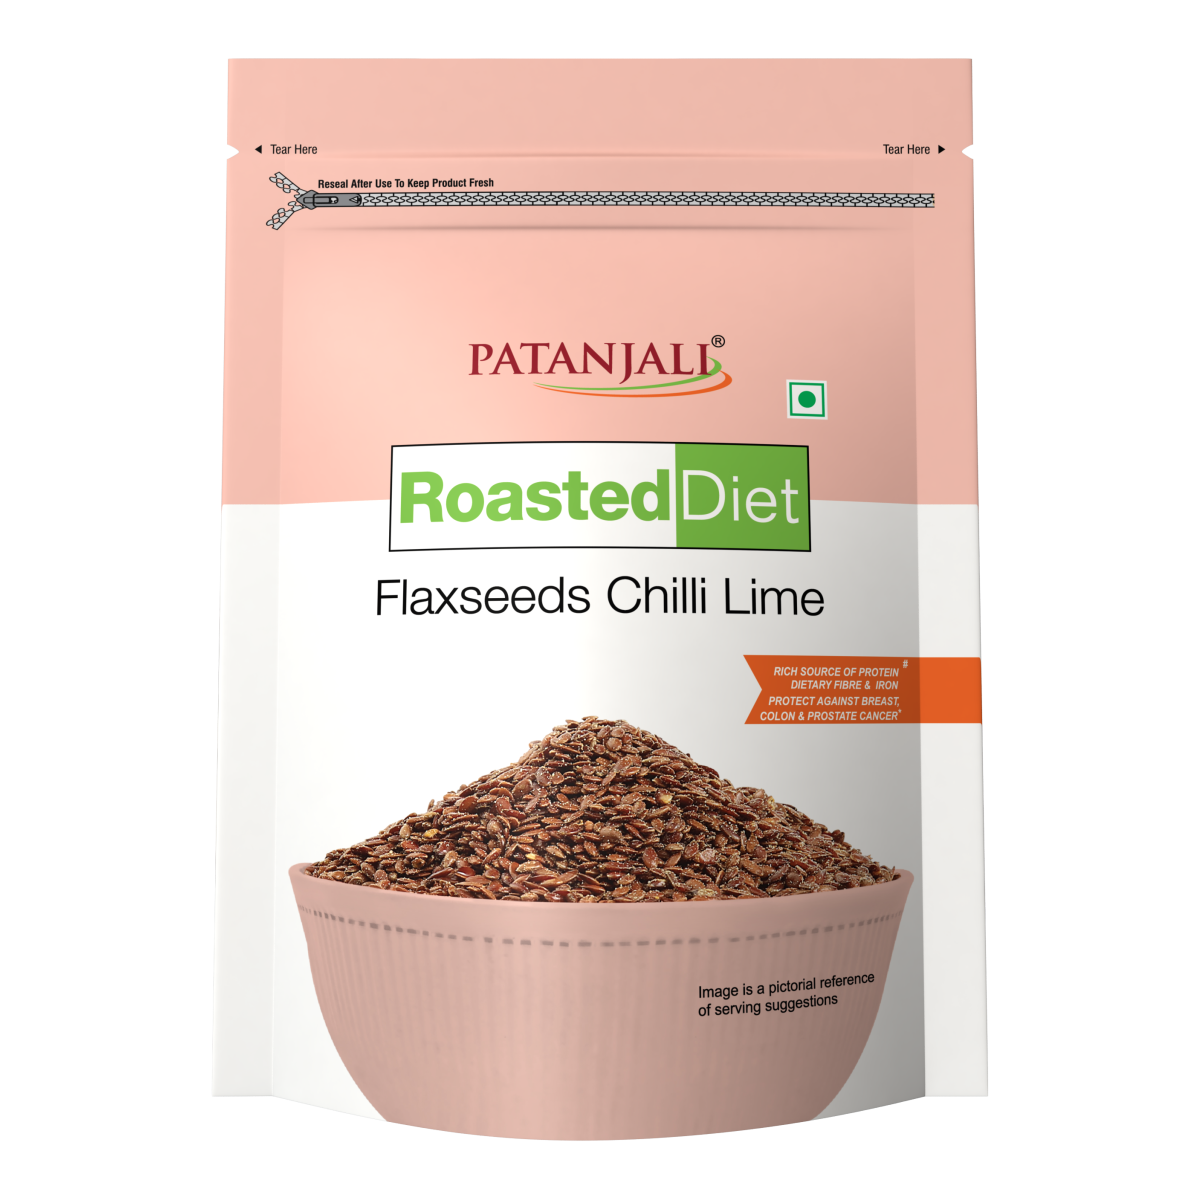 Patanjali Roasted Diet- Flax seed Chili Lime